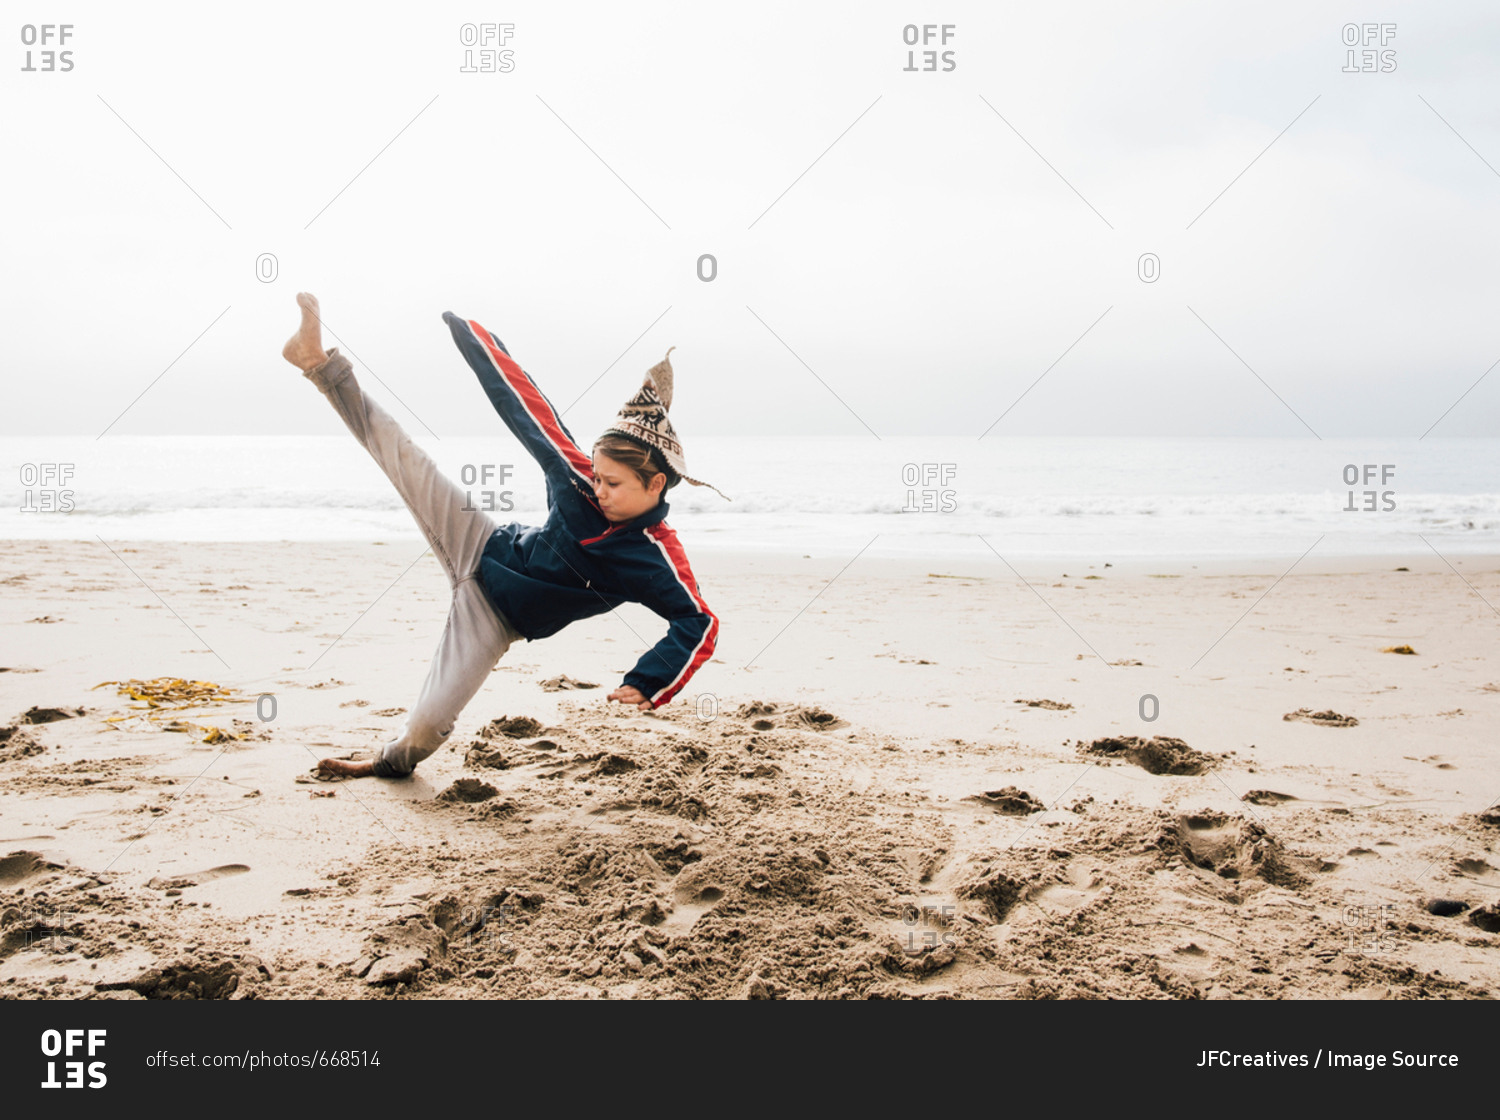 Young boy on beach, practicing martial arts, leg raised in kick